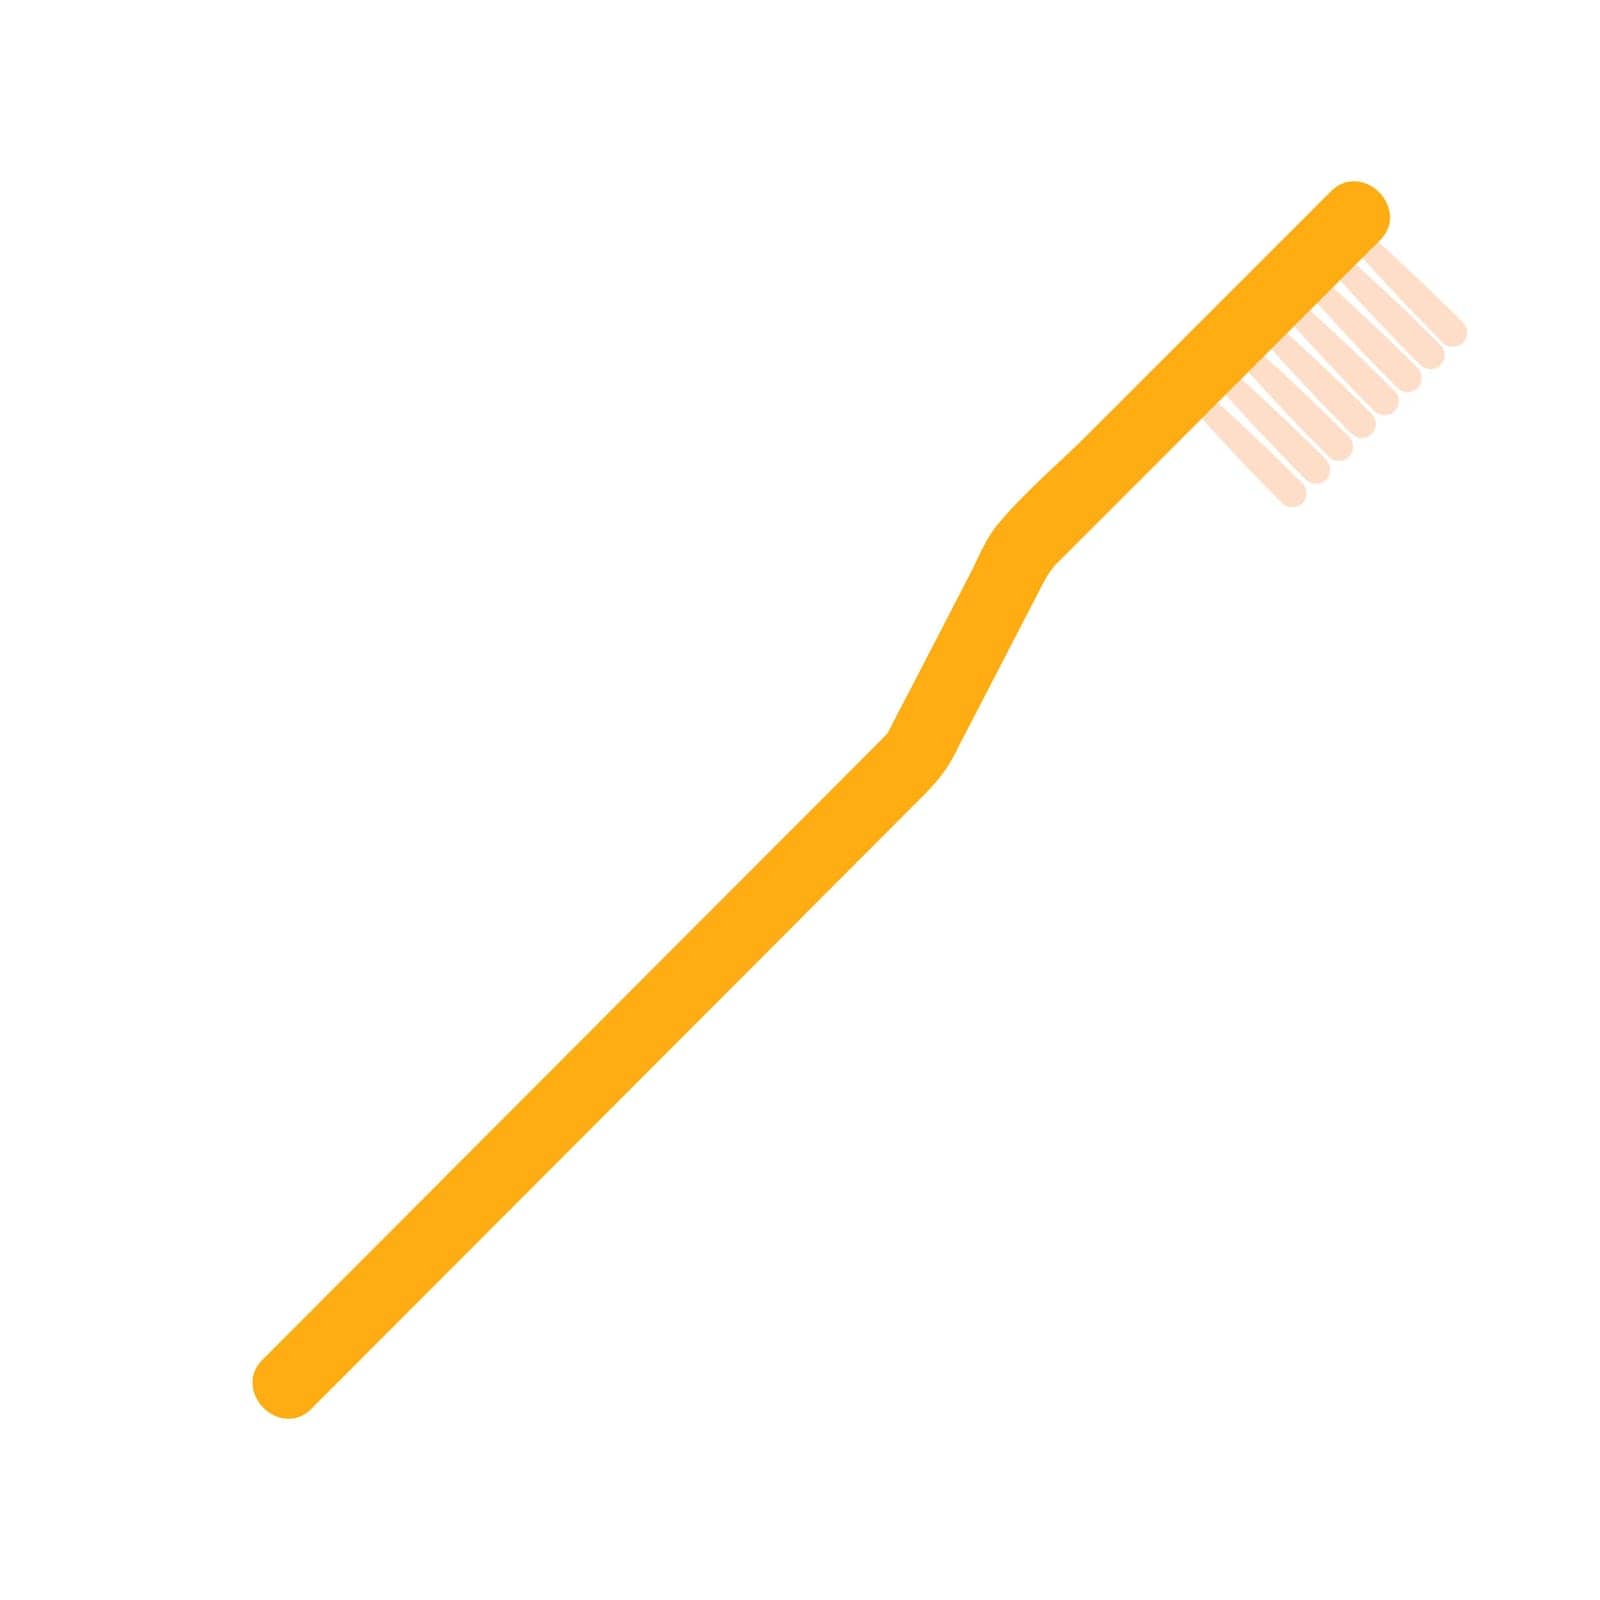 Toothbrush, yellow brush with bristles and handle for cleaning teeth by iconicprototype